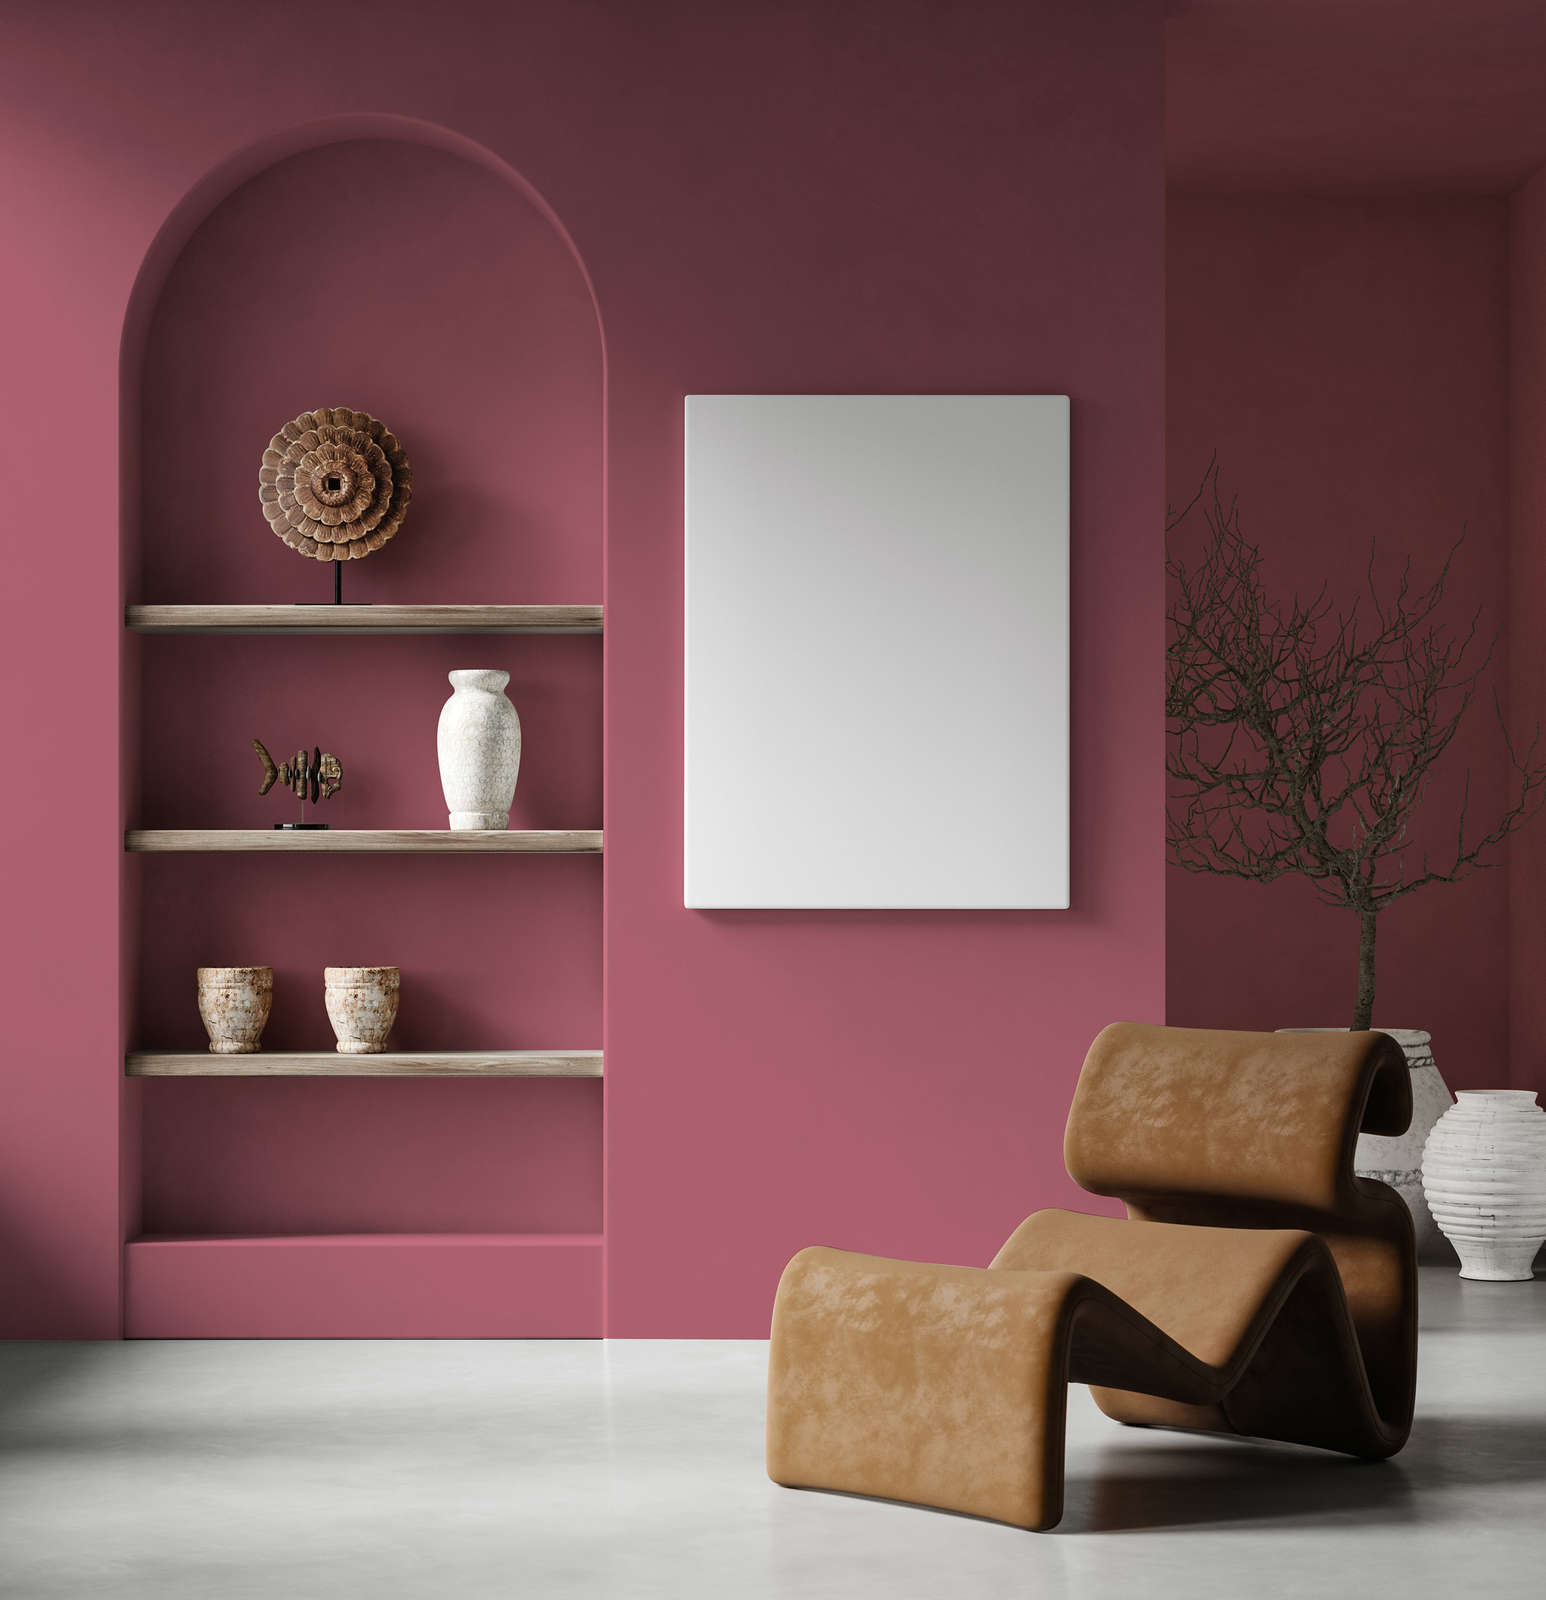             Premium Wall Paint Refreshing Dark Pink »Blooming Blossom« NW1018 – 1 litre
        